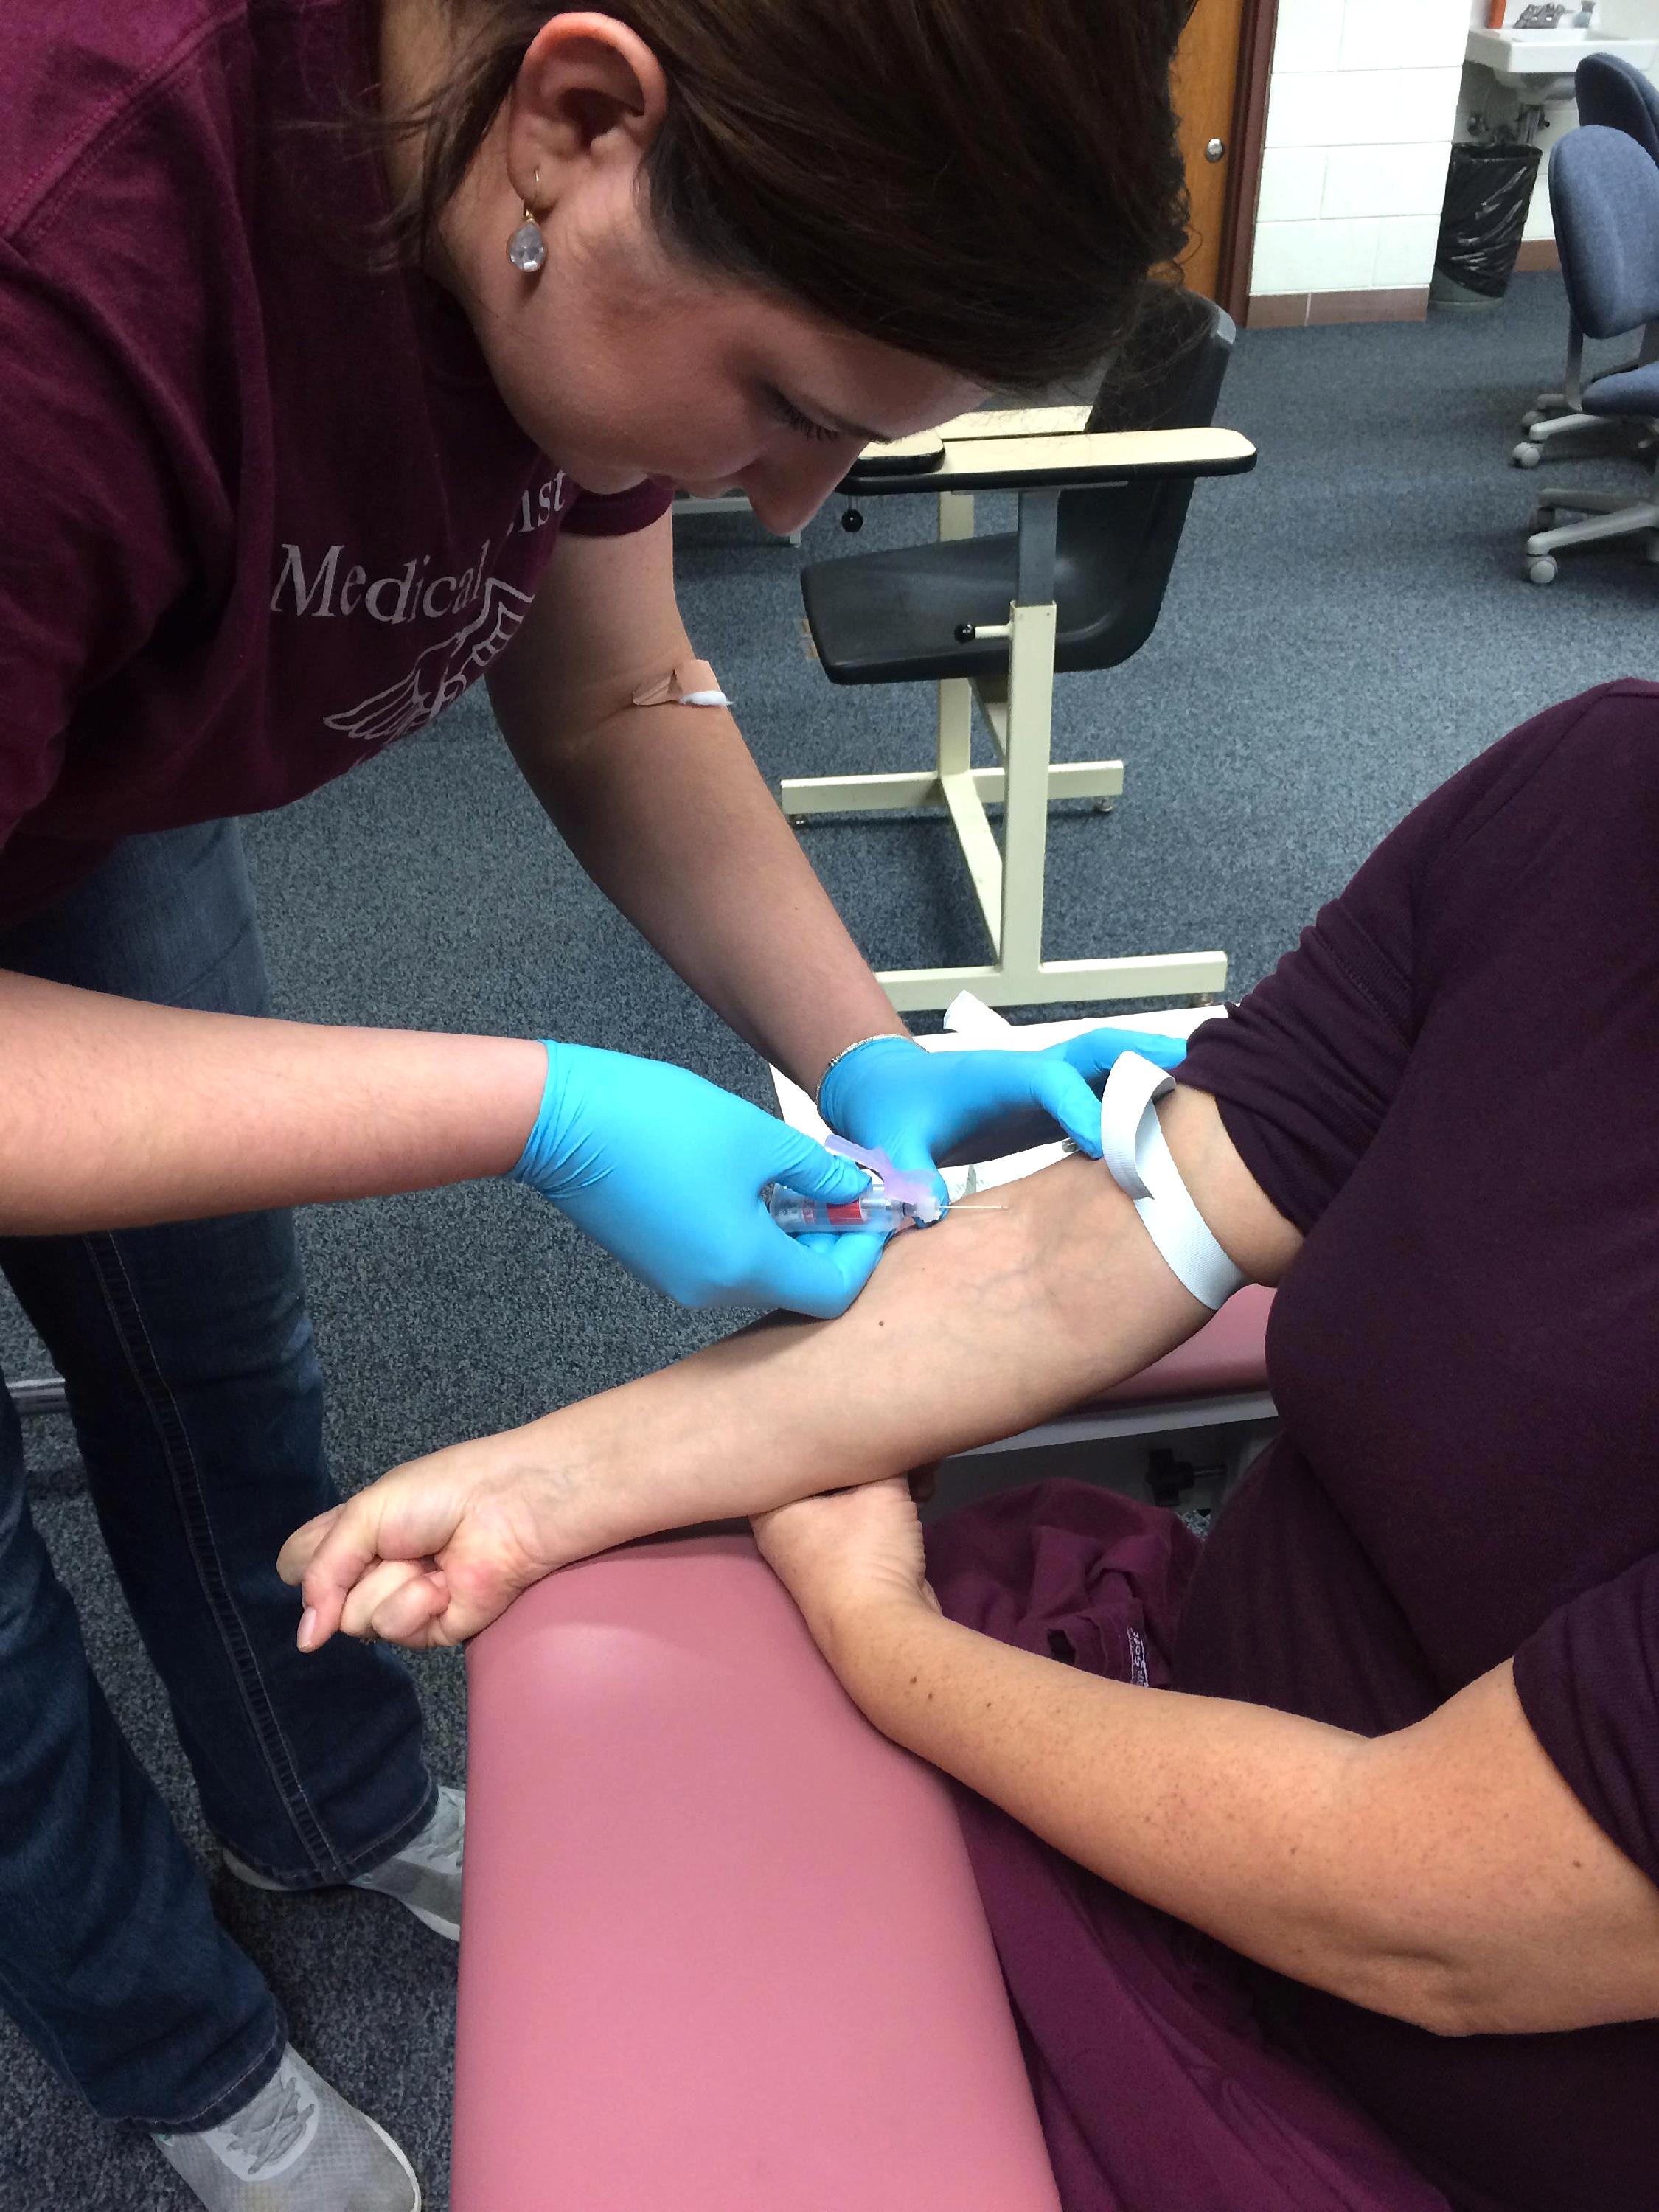 Medical Assistant student inserting needle in another student's vein